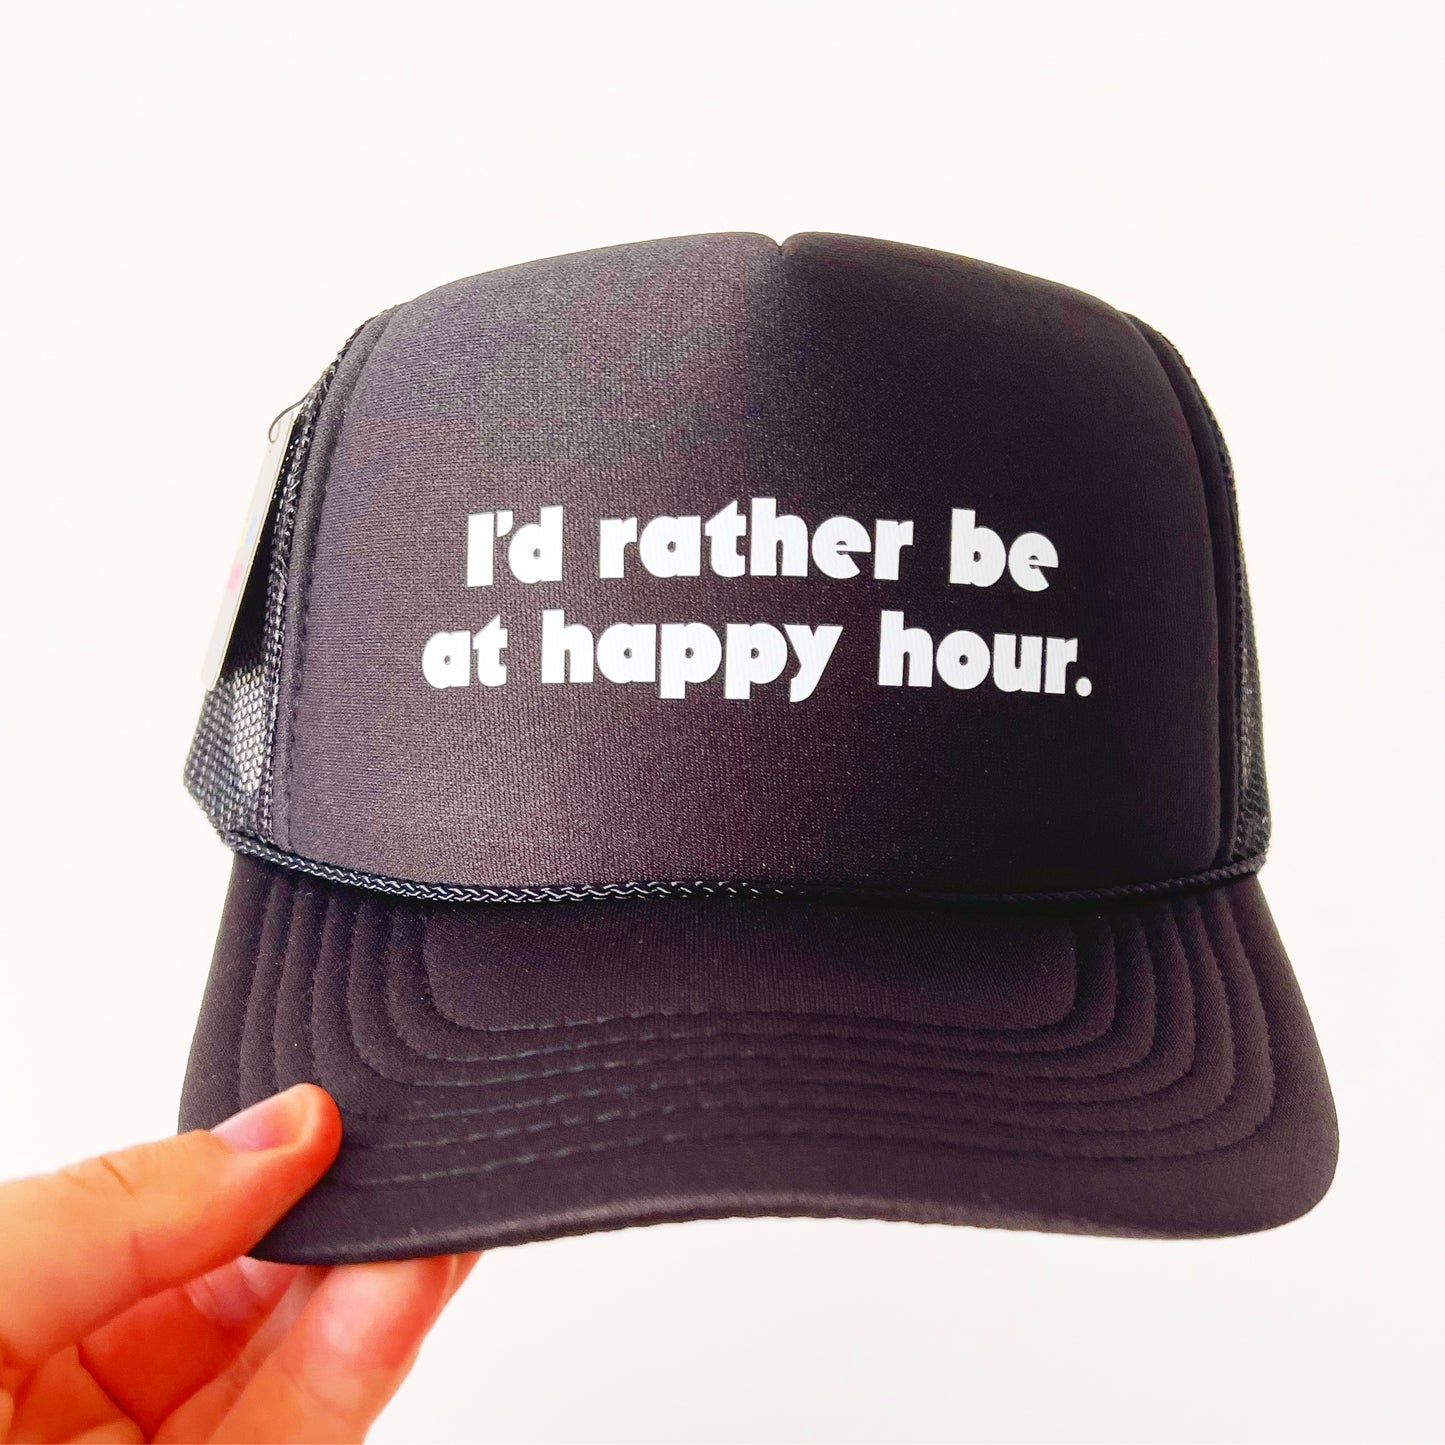 I’d rather be at happy hour.